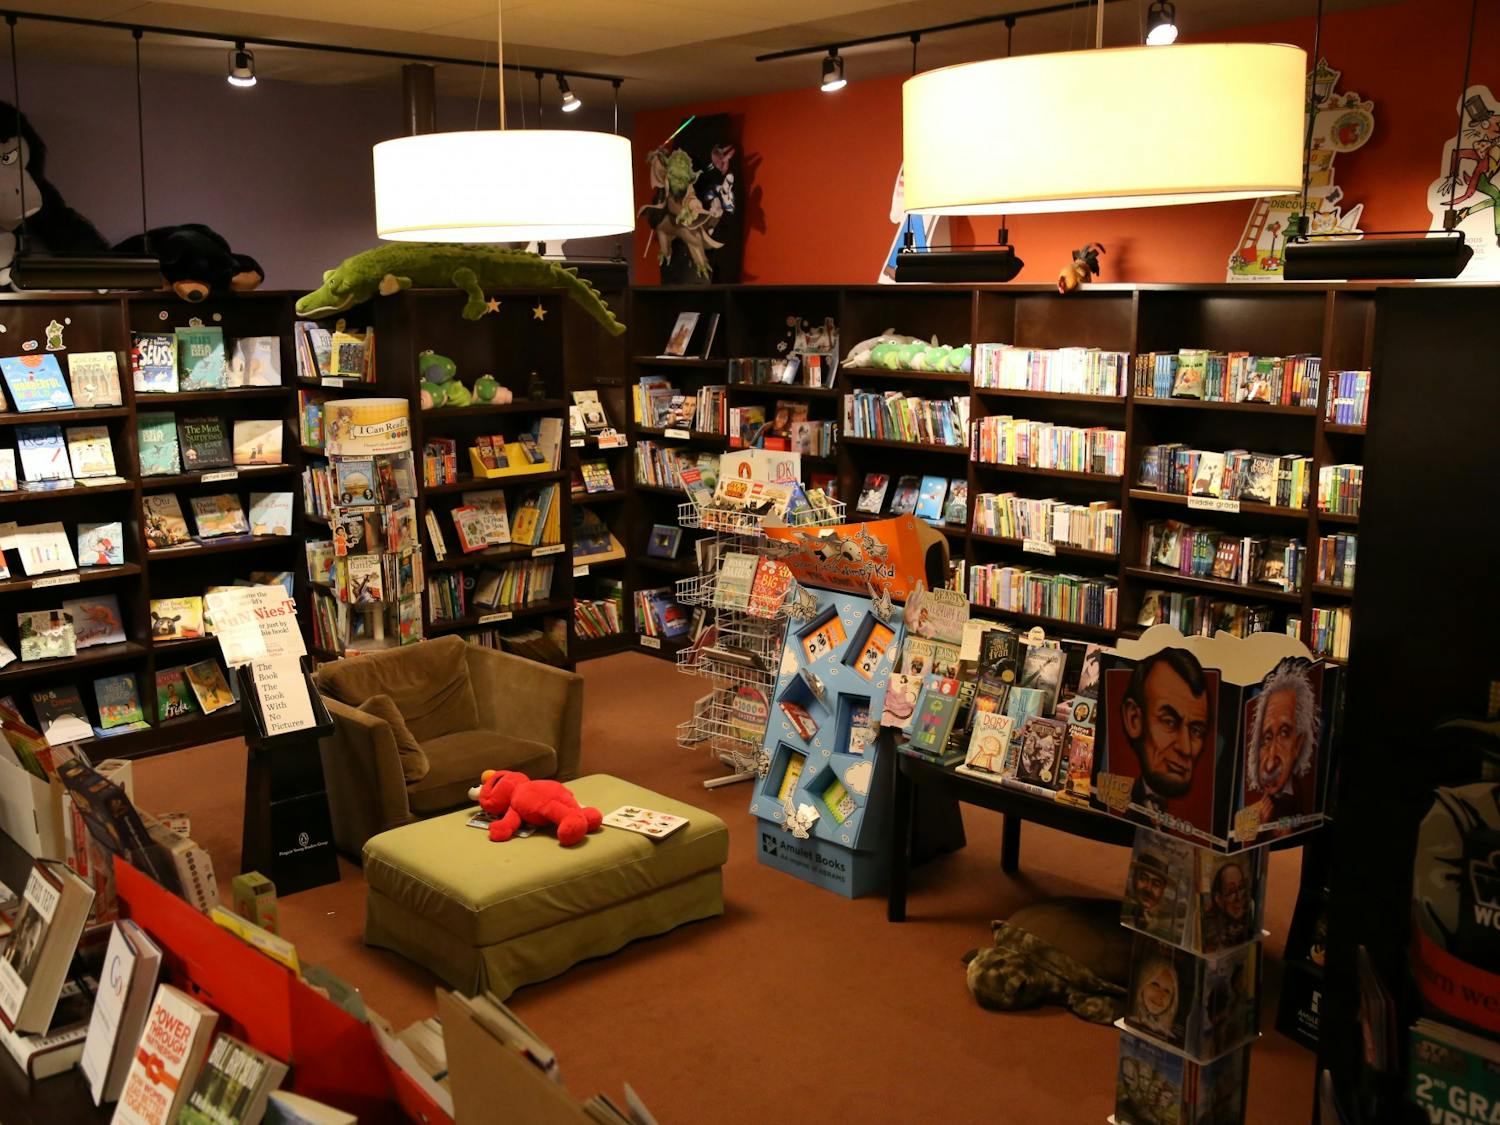 The interior of Flyleaf Books. Photo courtesy of Jamie Fiocco.